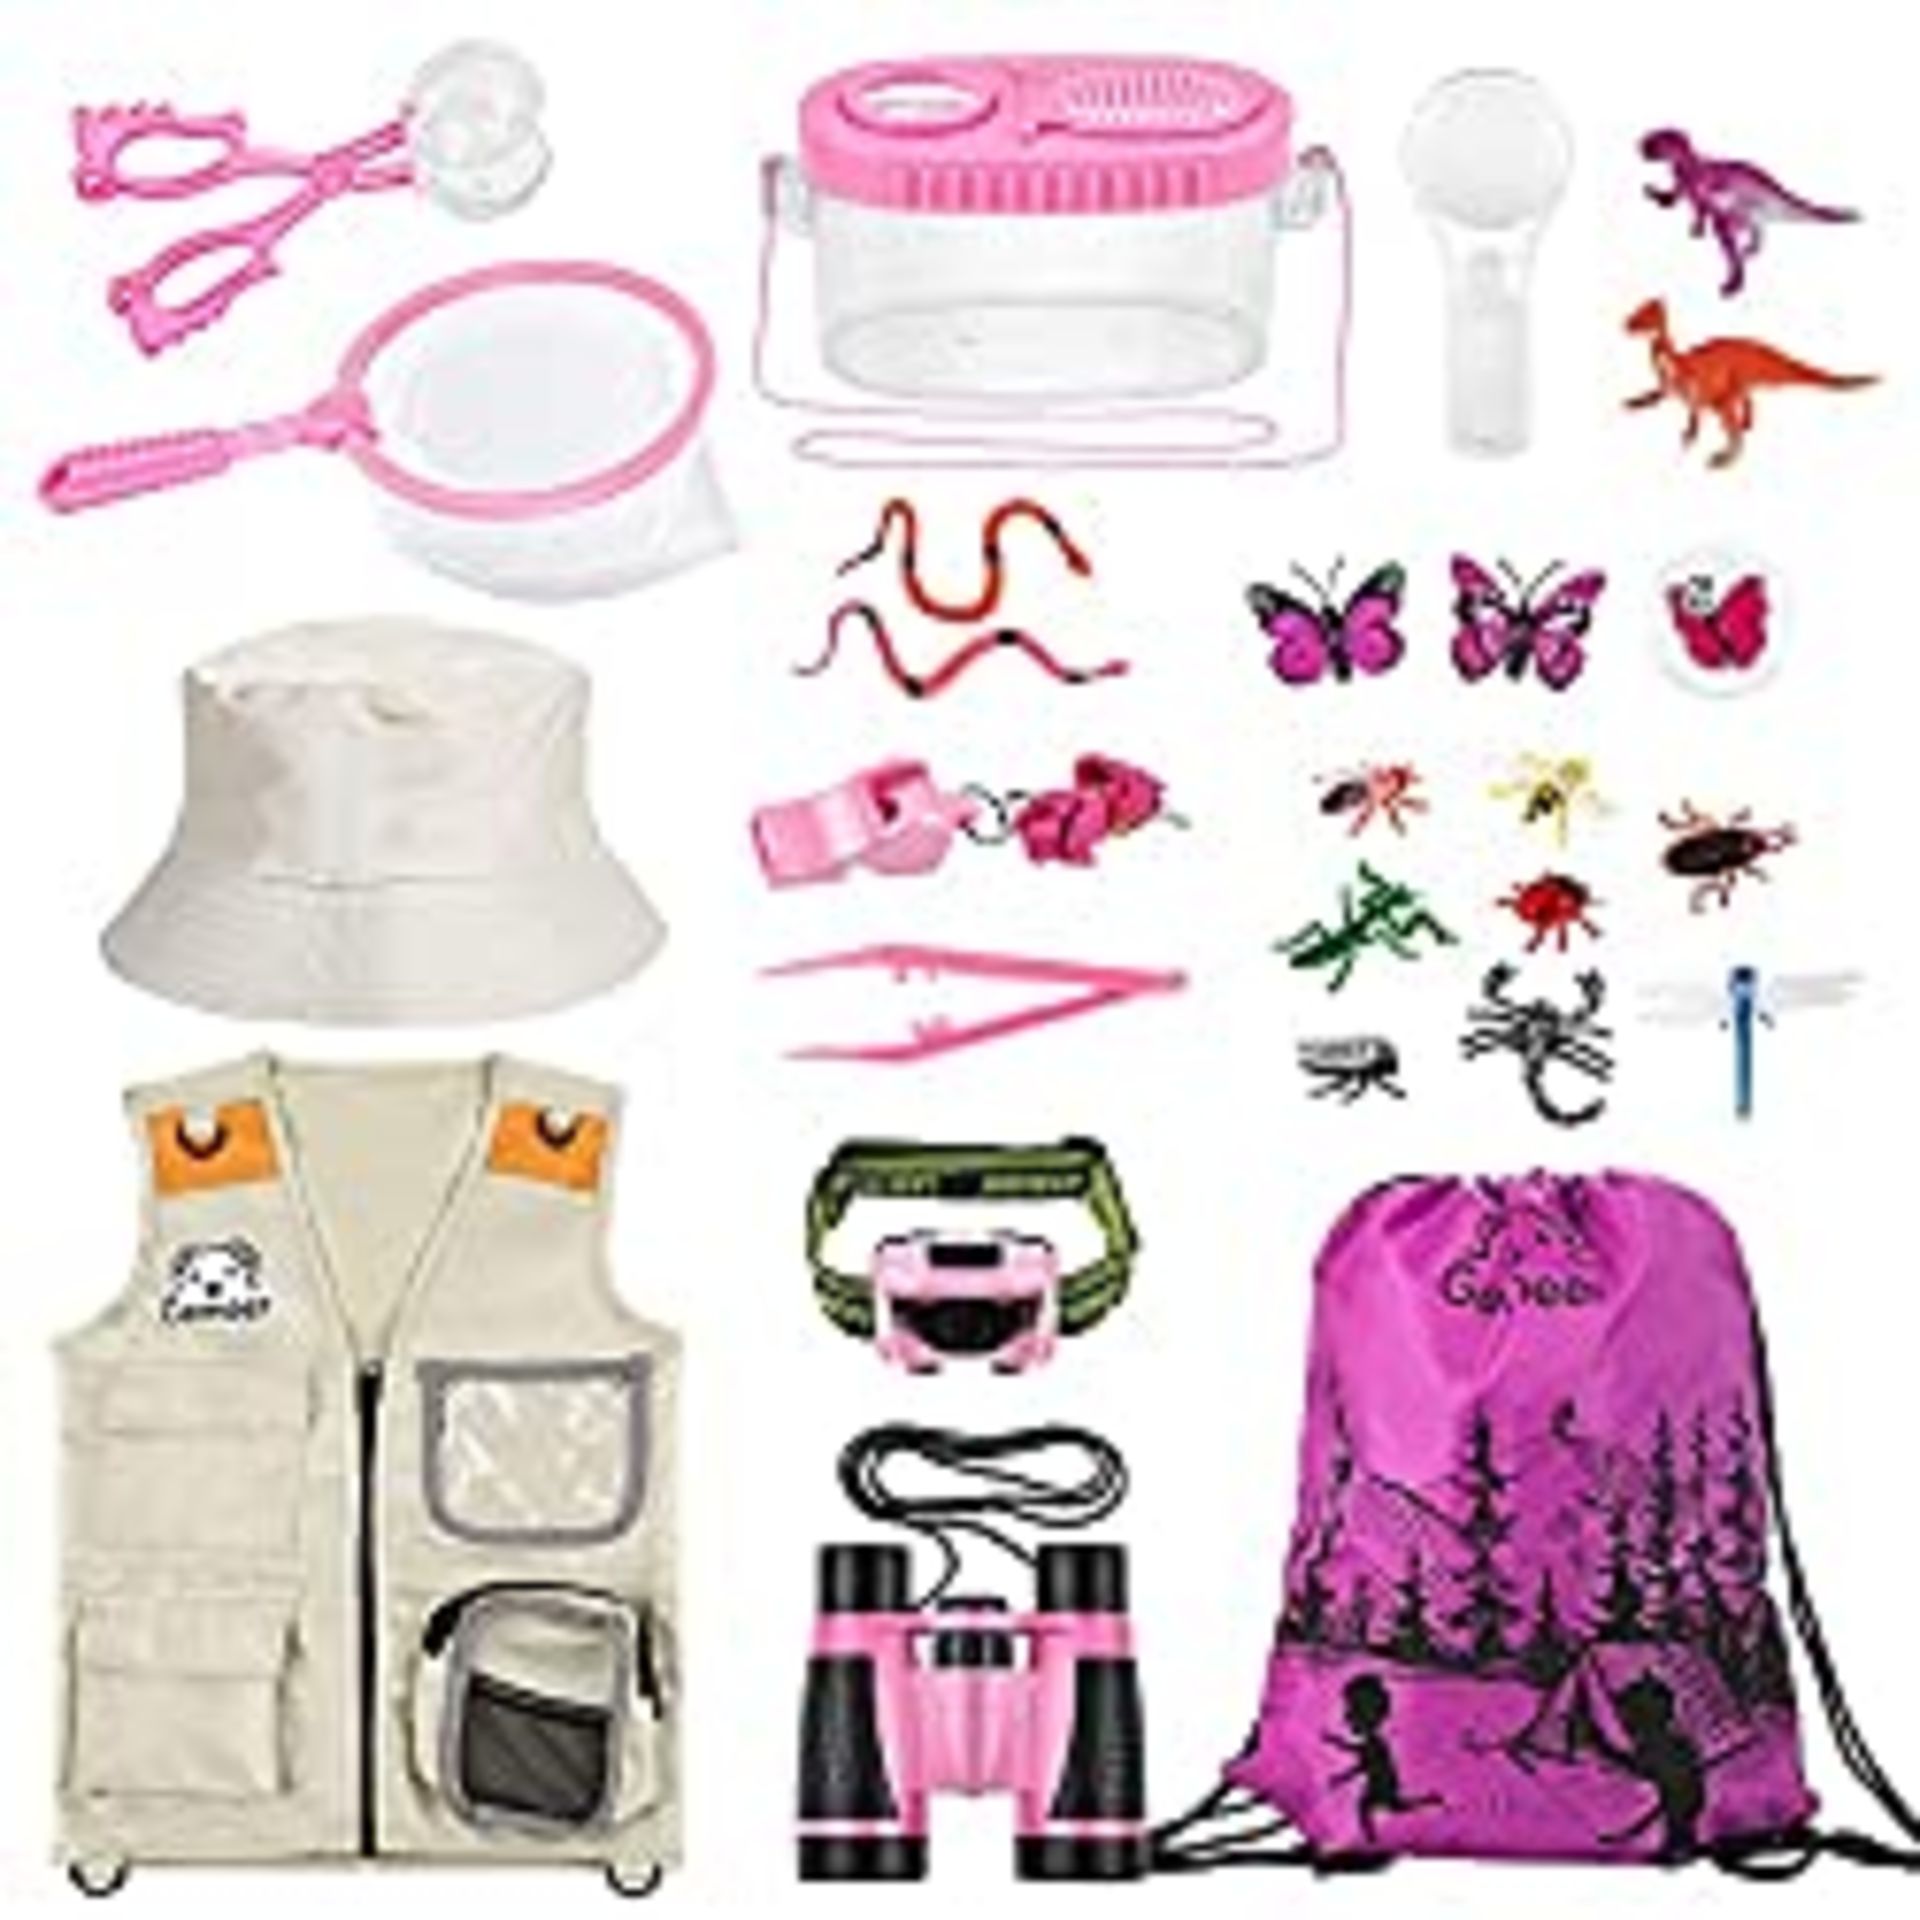 RRP £183.73 Total, Lot consisting of 18 items - See description. - Image 7 of 8